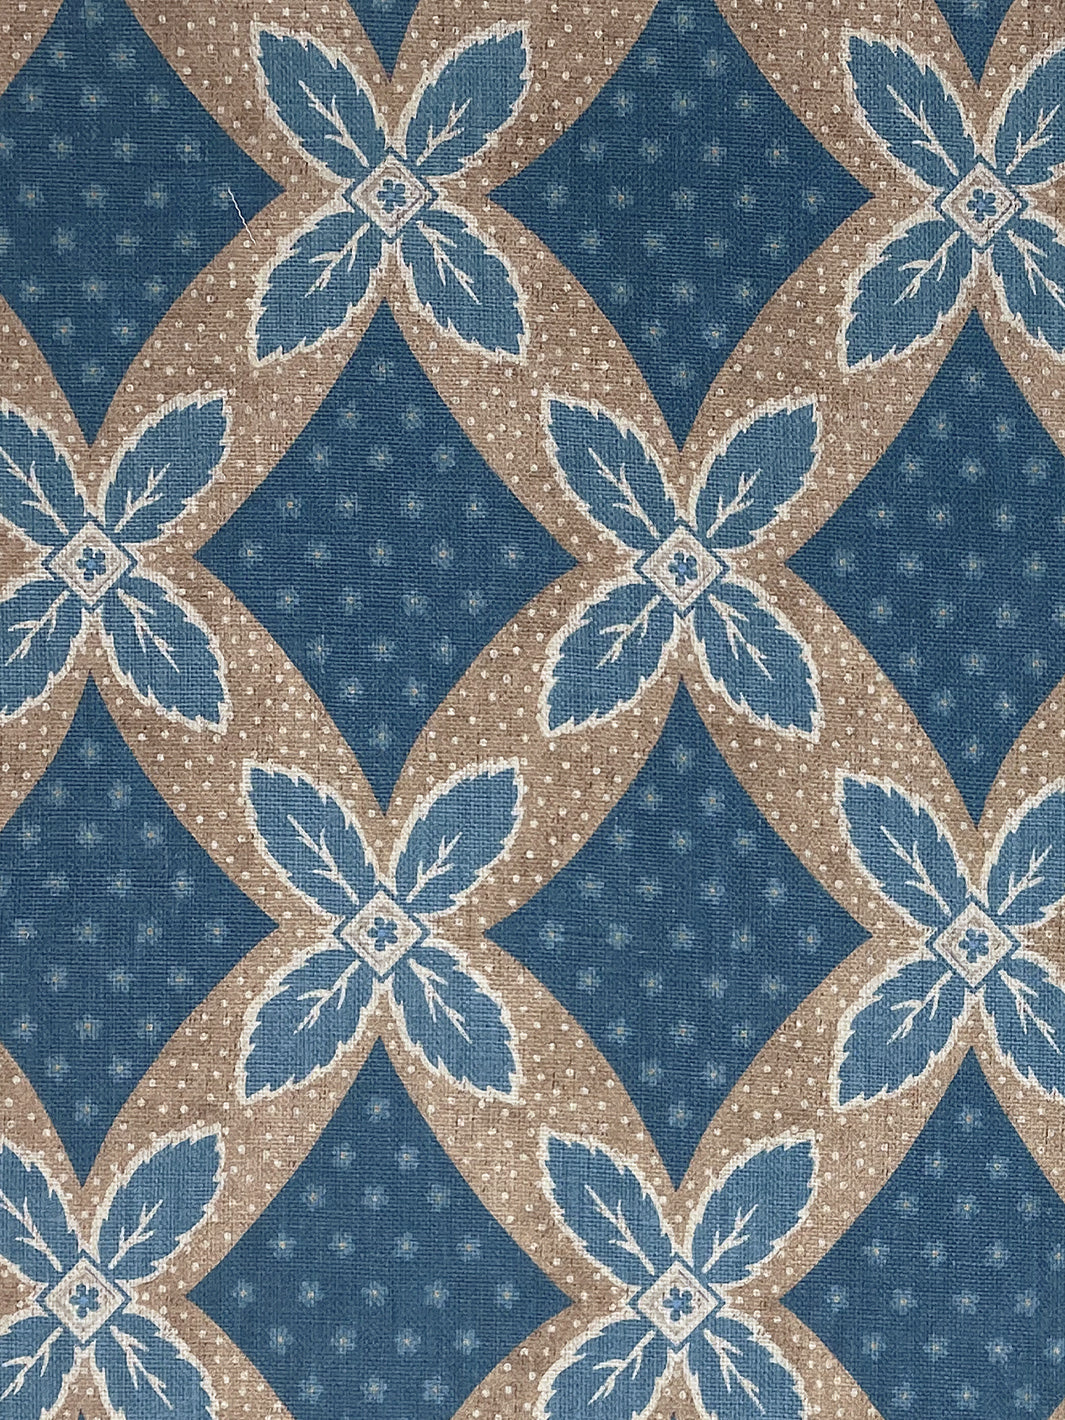 'Arthur' Linen Fabric by Nathan Turner - Navy